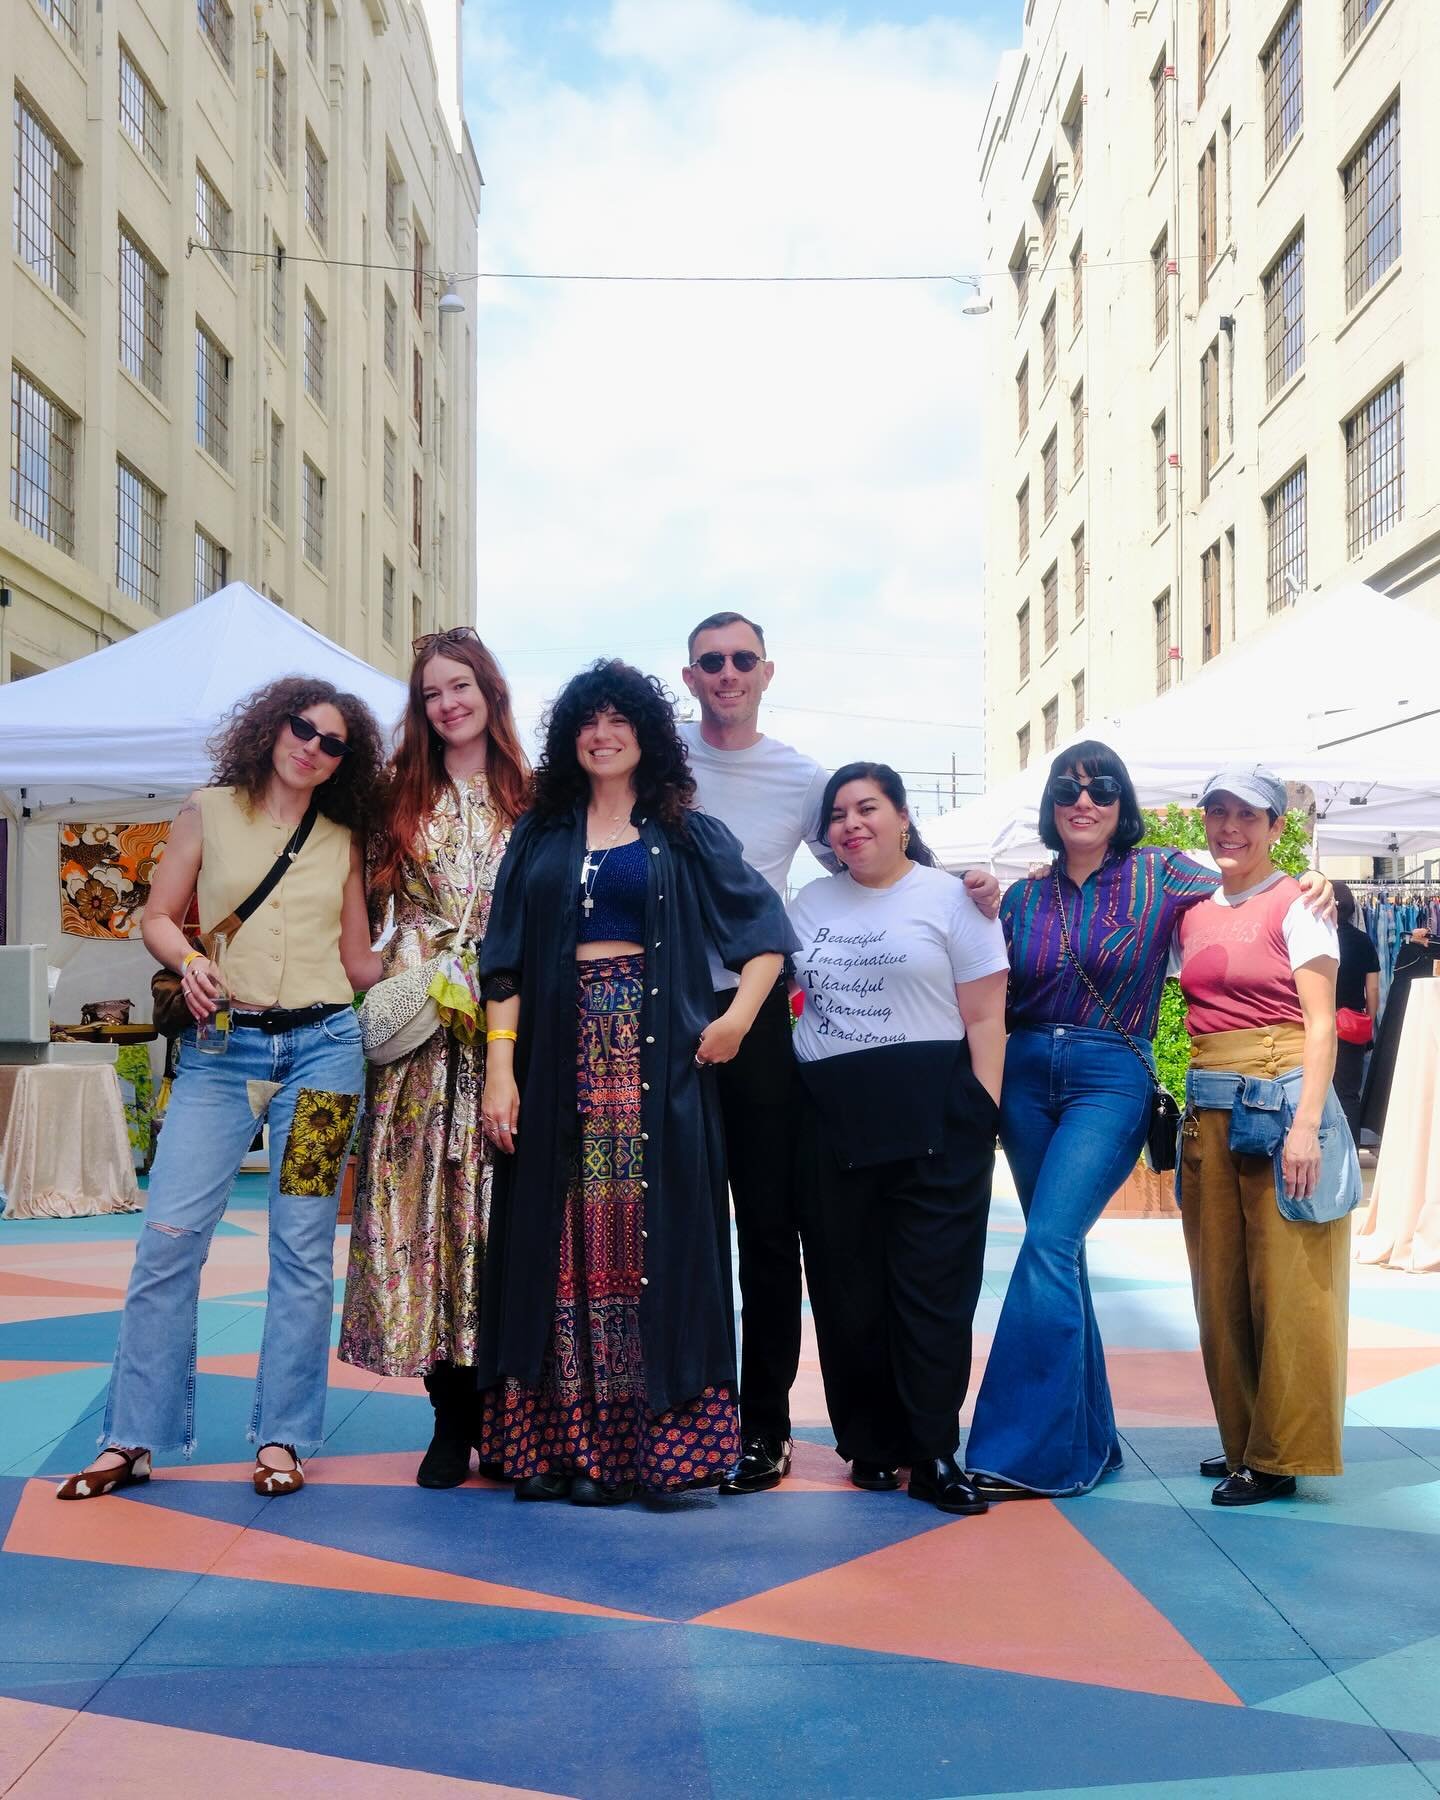 What a day ☀️ thank you to everyone who came out for our May market and experienced all the magic with us! We can&rsquo;t wait to be back on JUNE 22nd - tickets now available using the link in our bio.

#vintageclothing #vintagemarket #losangeles #th